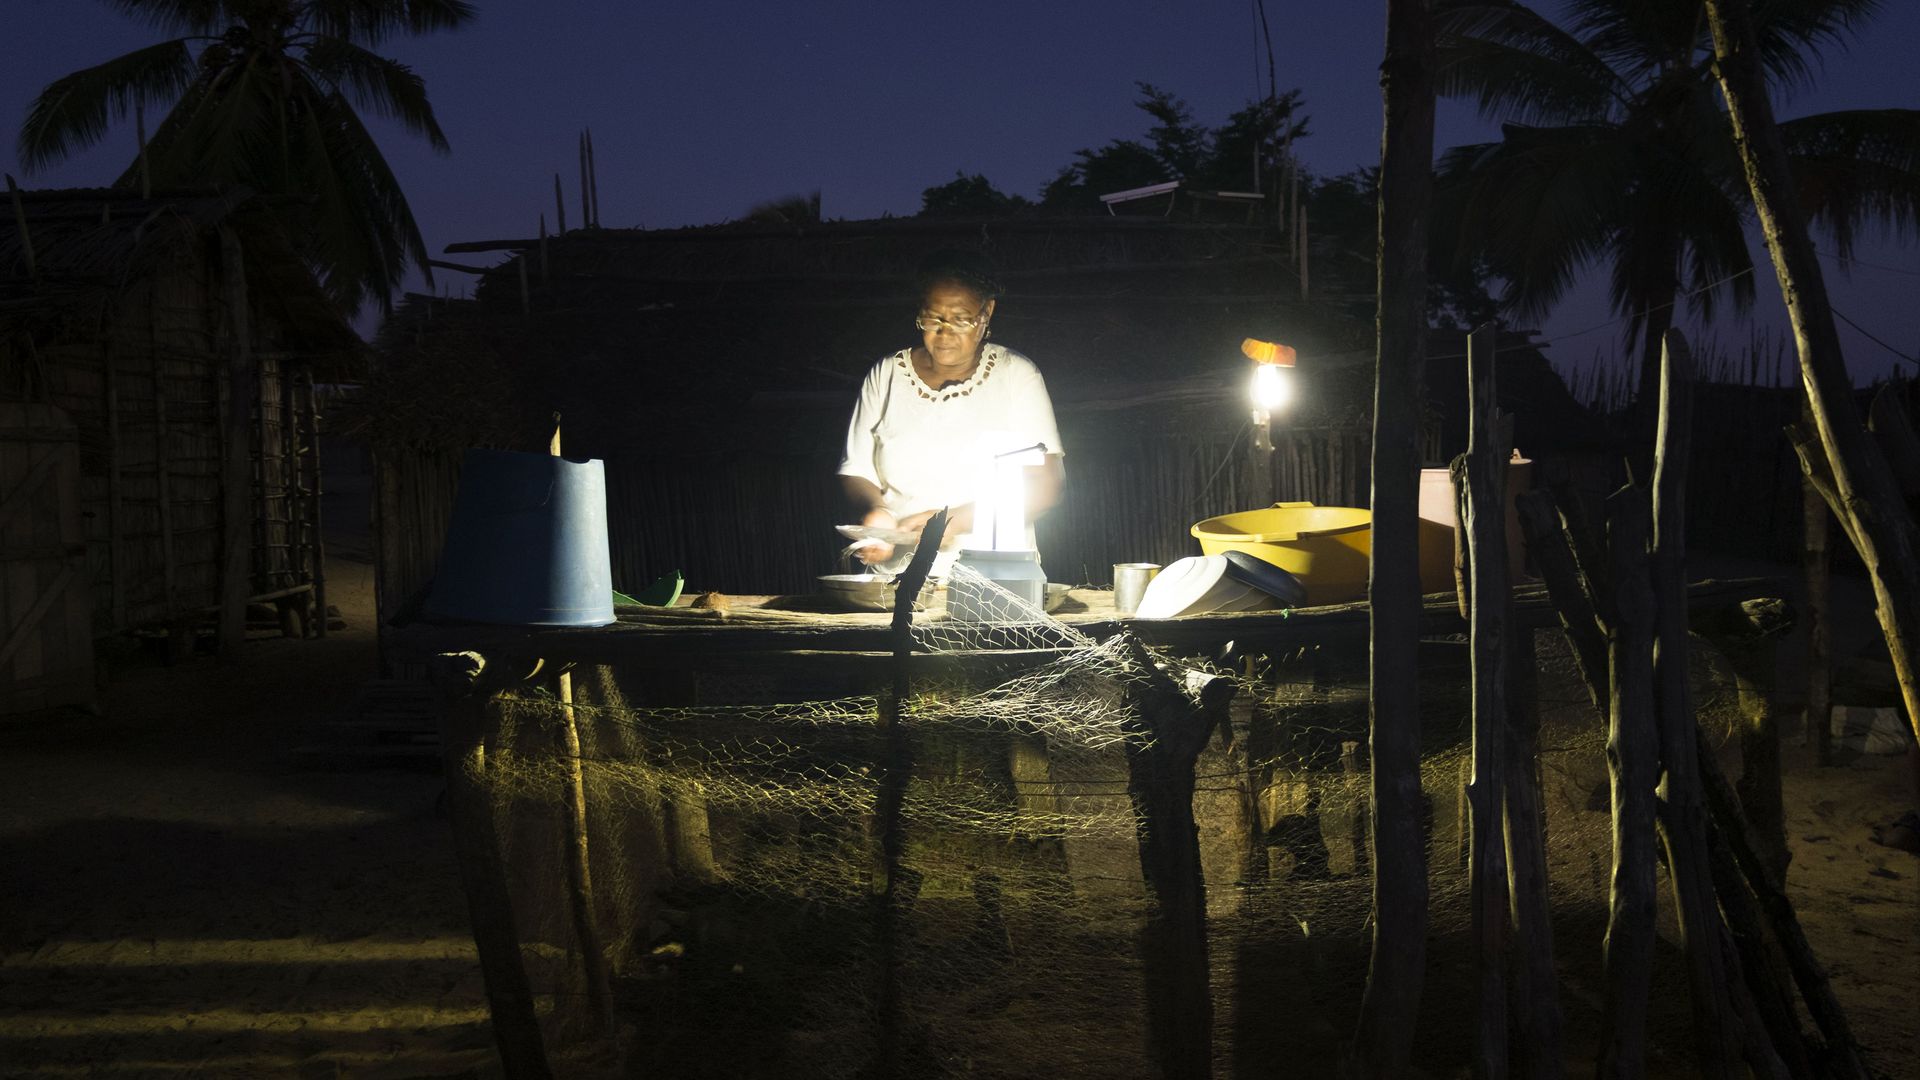 A woman in Madagascar working outside at night in lamplight